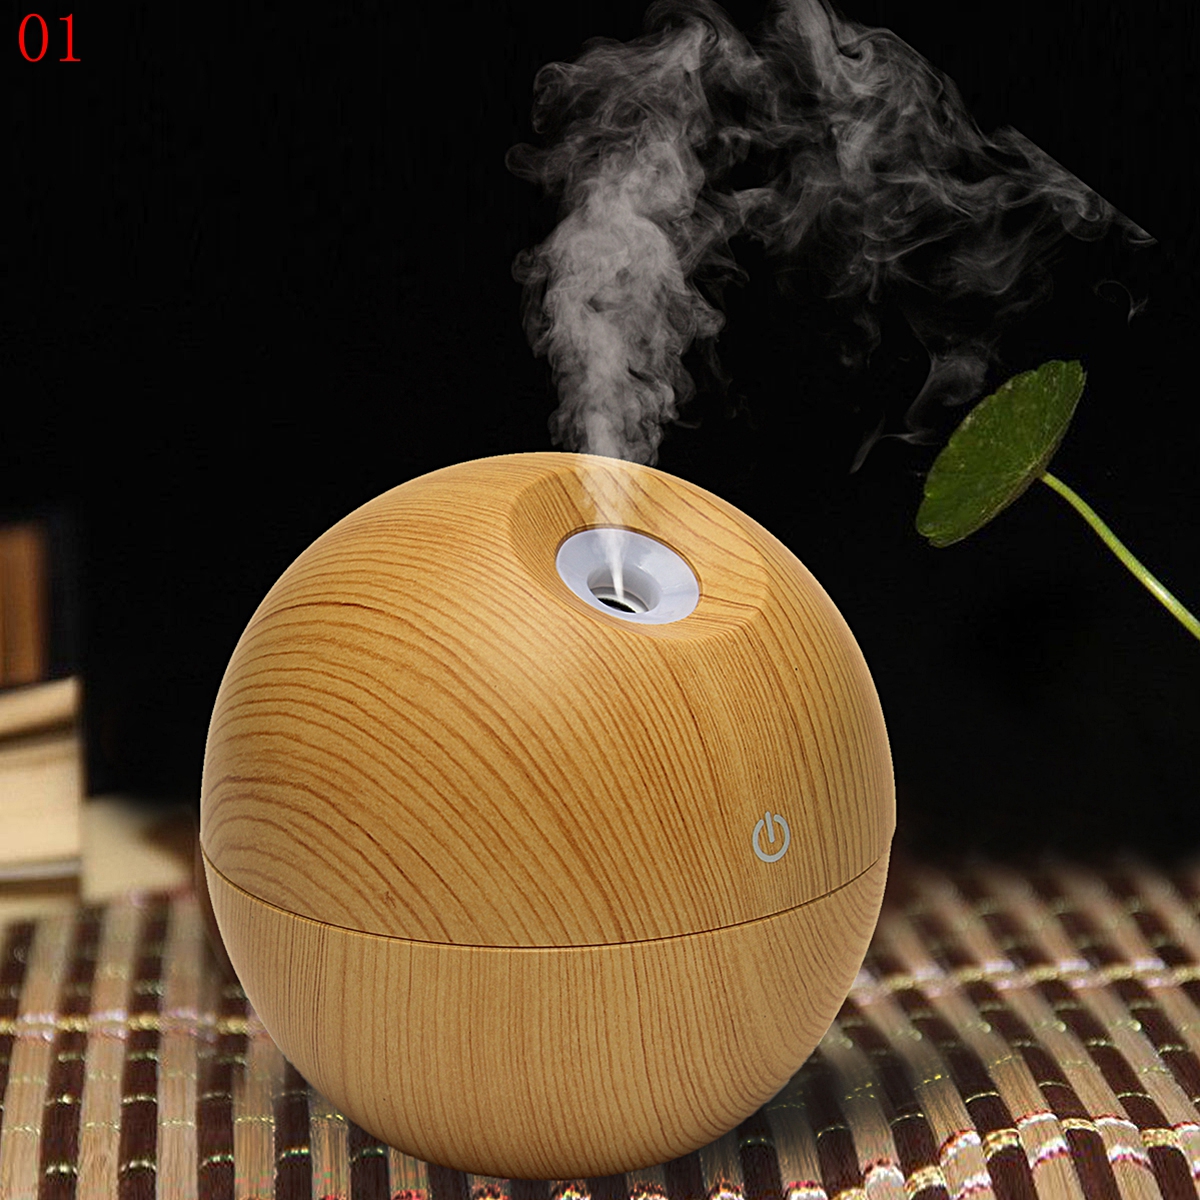 130ml-USB-Ultrasonic-Humidifier-Color-changing-LED-Aromatherapy-Essential-Oil-Diffuser-Aromatherapy-1098108